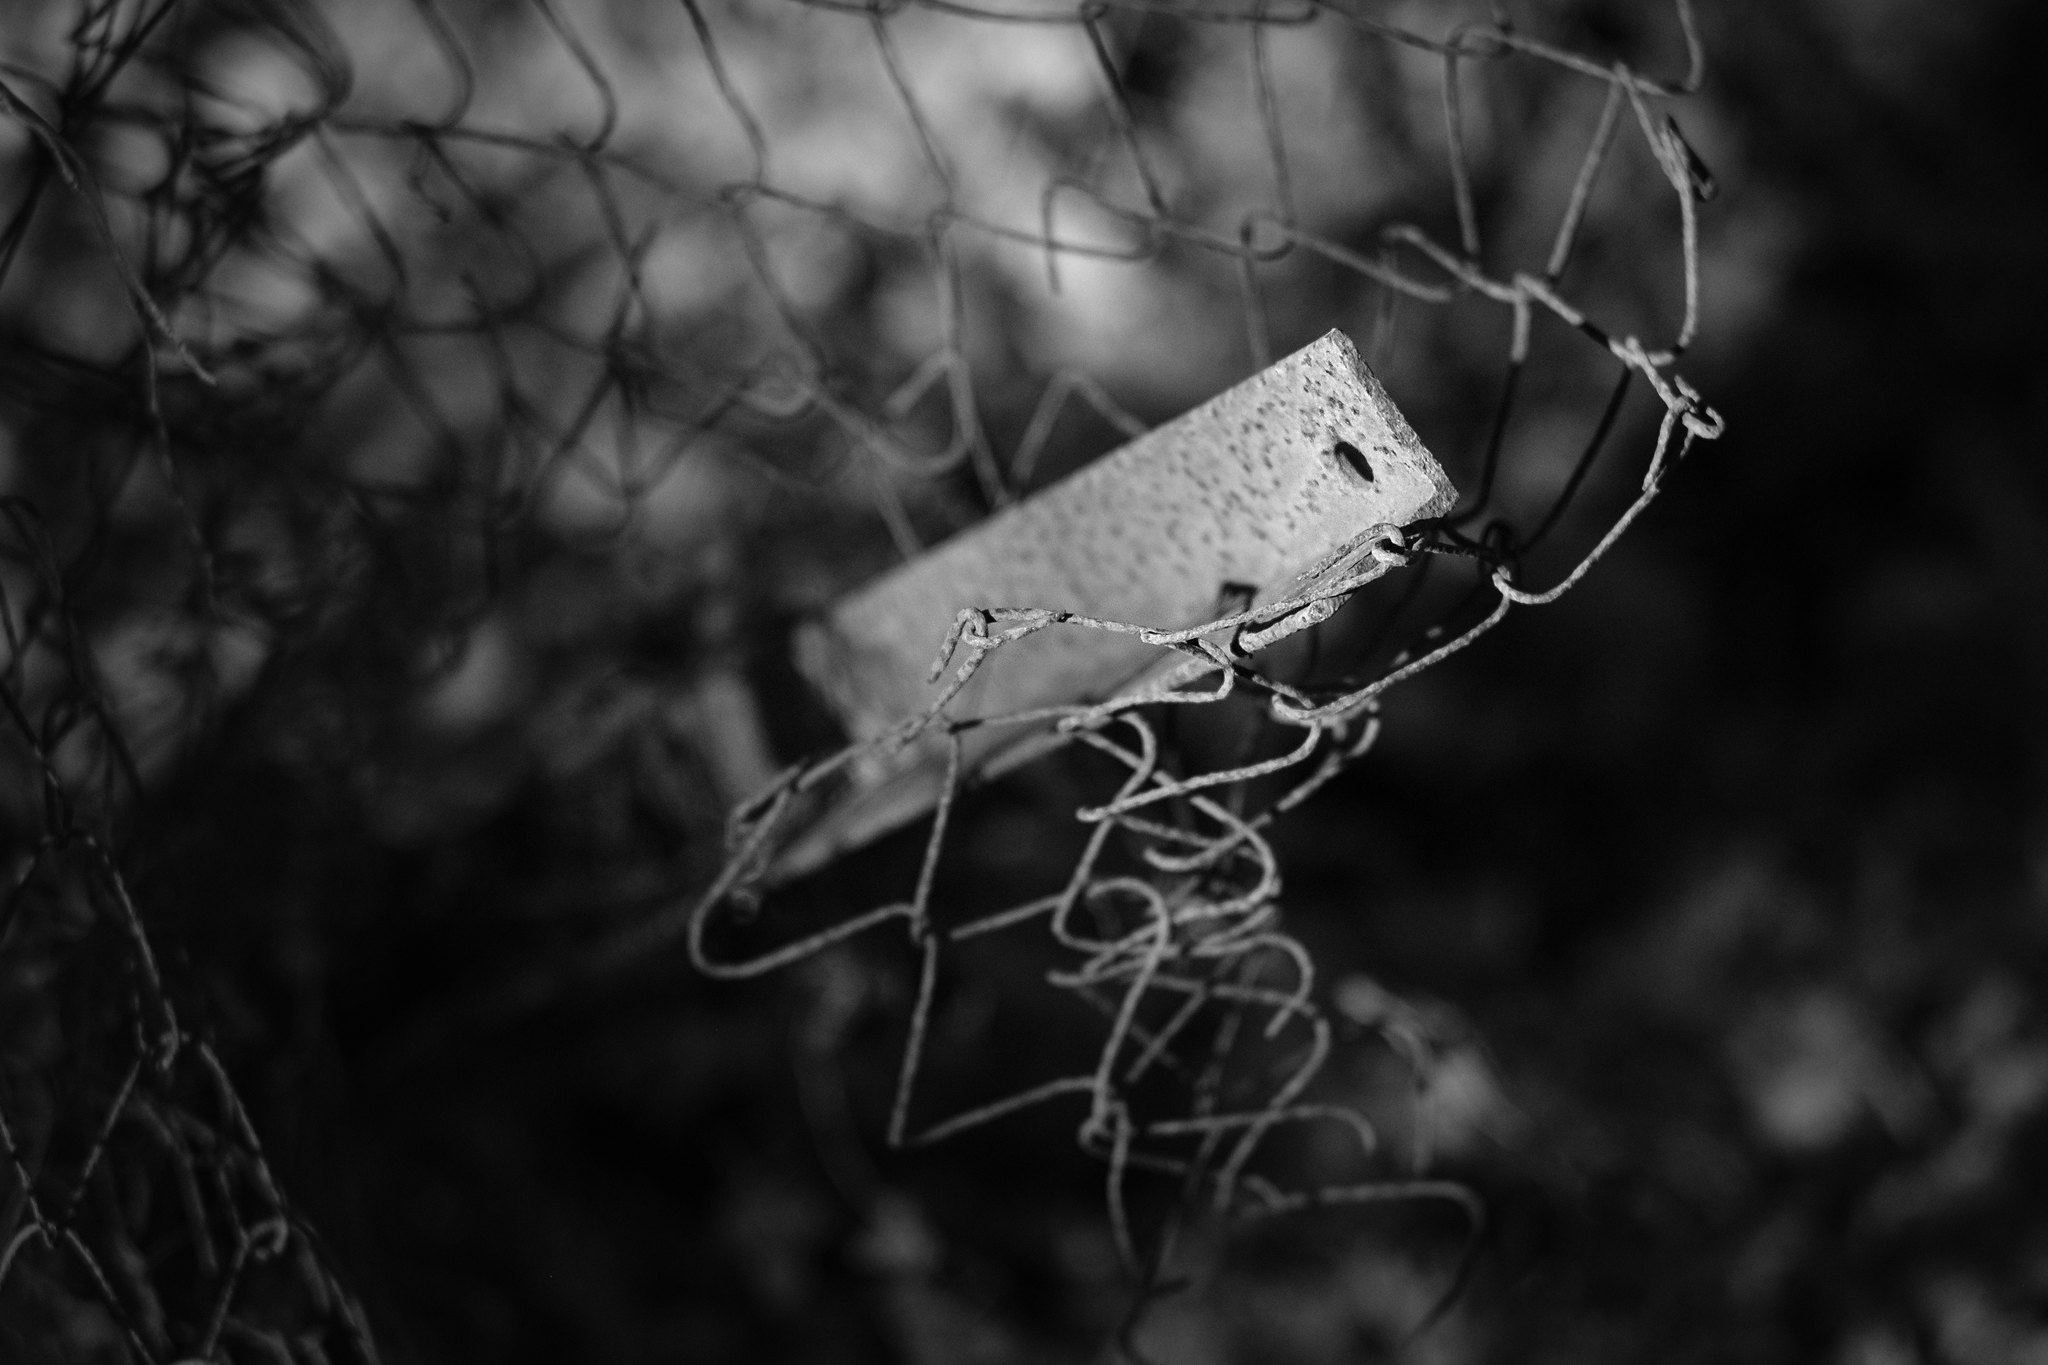 tangle of derelict chain-link fencing with metal post, in black and white